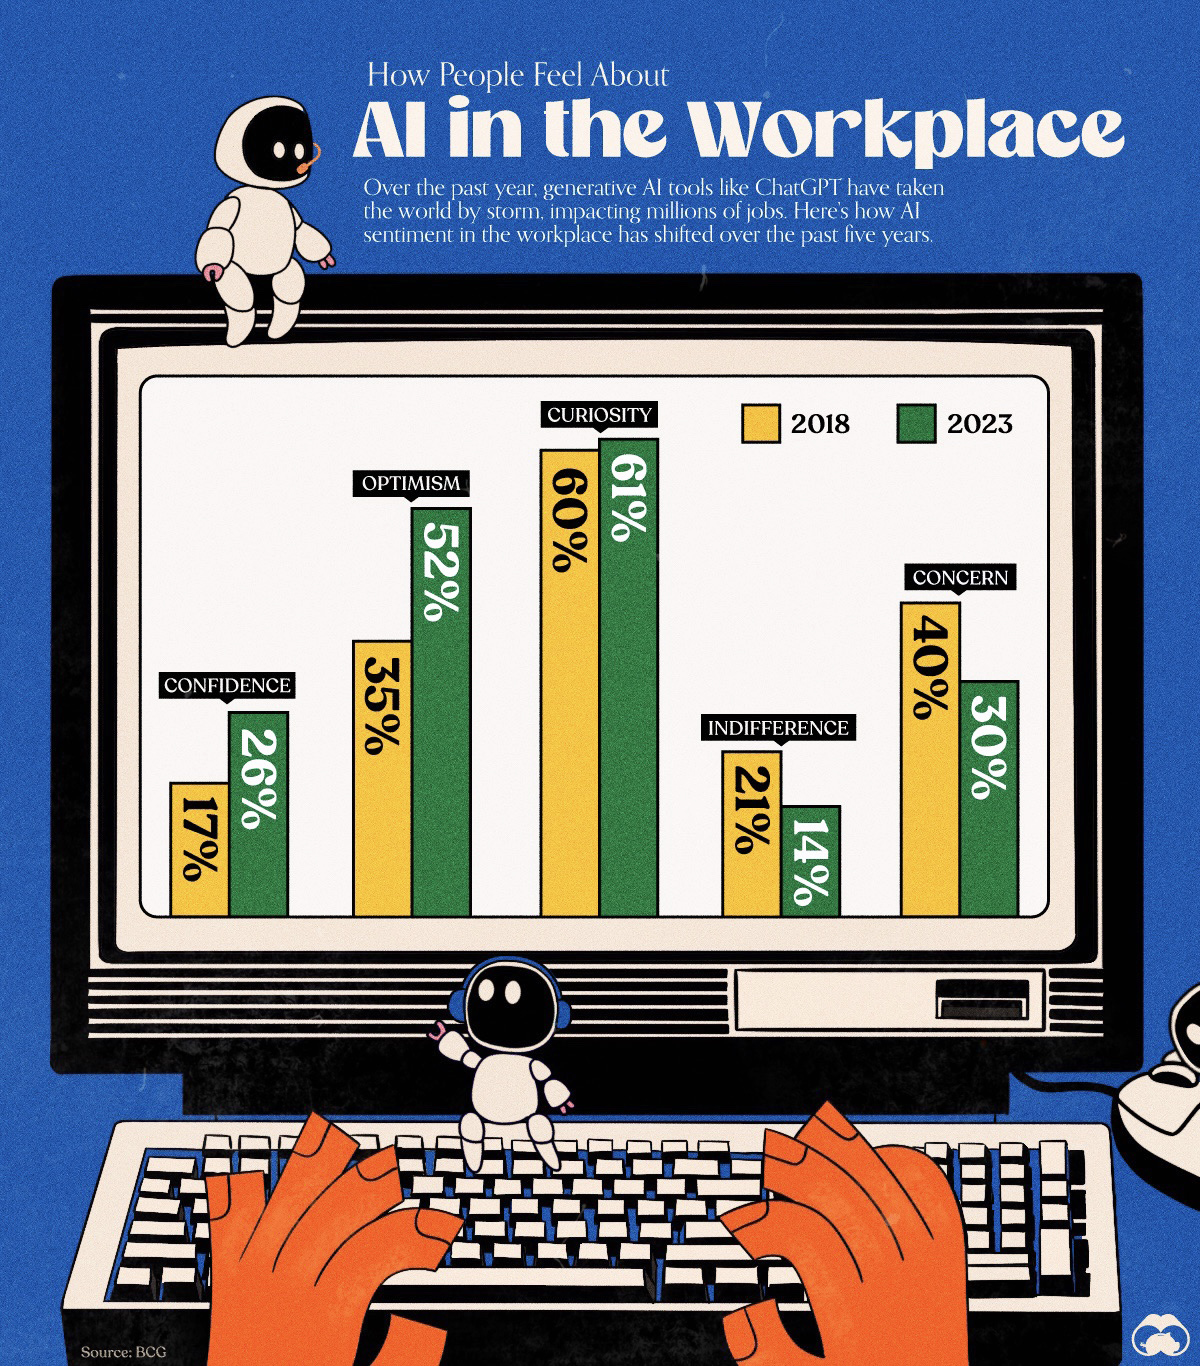 A series of charts measuring how people feel about having AI in the workplace.